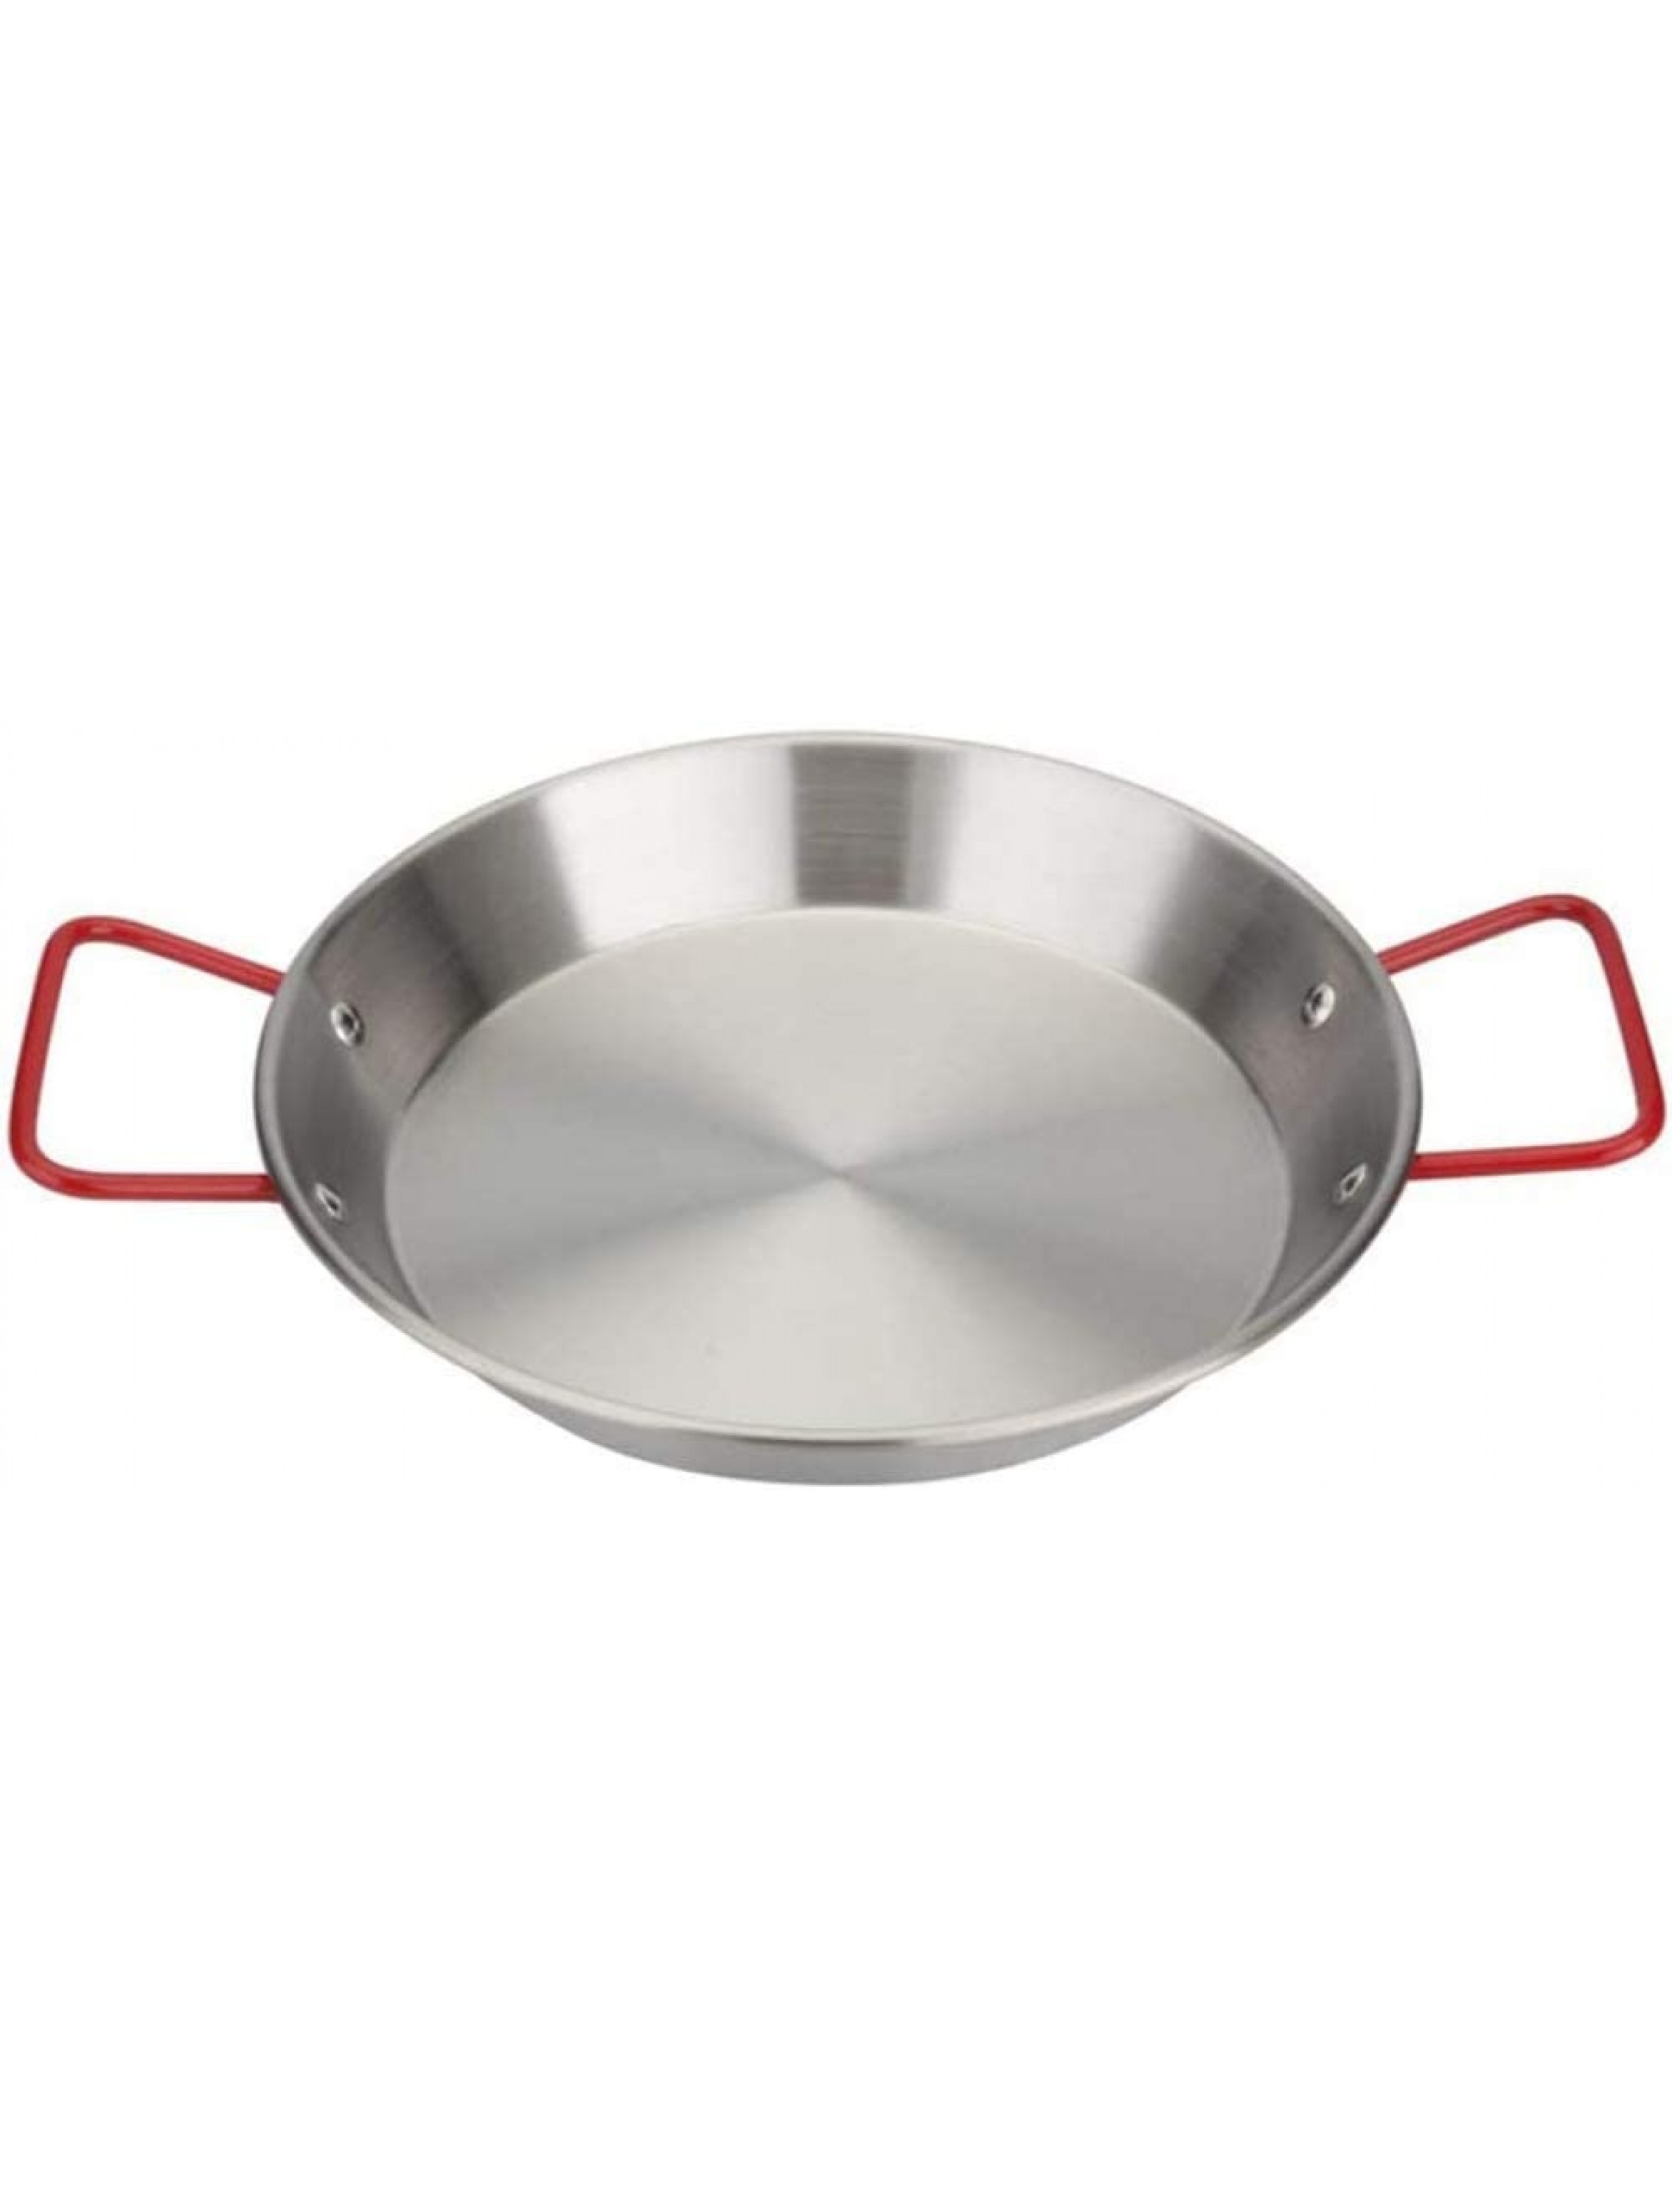 FBWSM Professional Paella Pan Nonstick Stainless Steel Anti-scalding Handles Universal for All Sources of Heating for Home Hotel Restaurant -32cm - B136Q3OIV